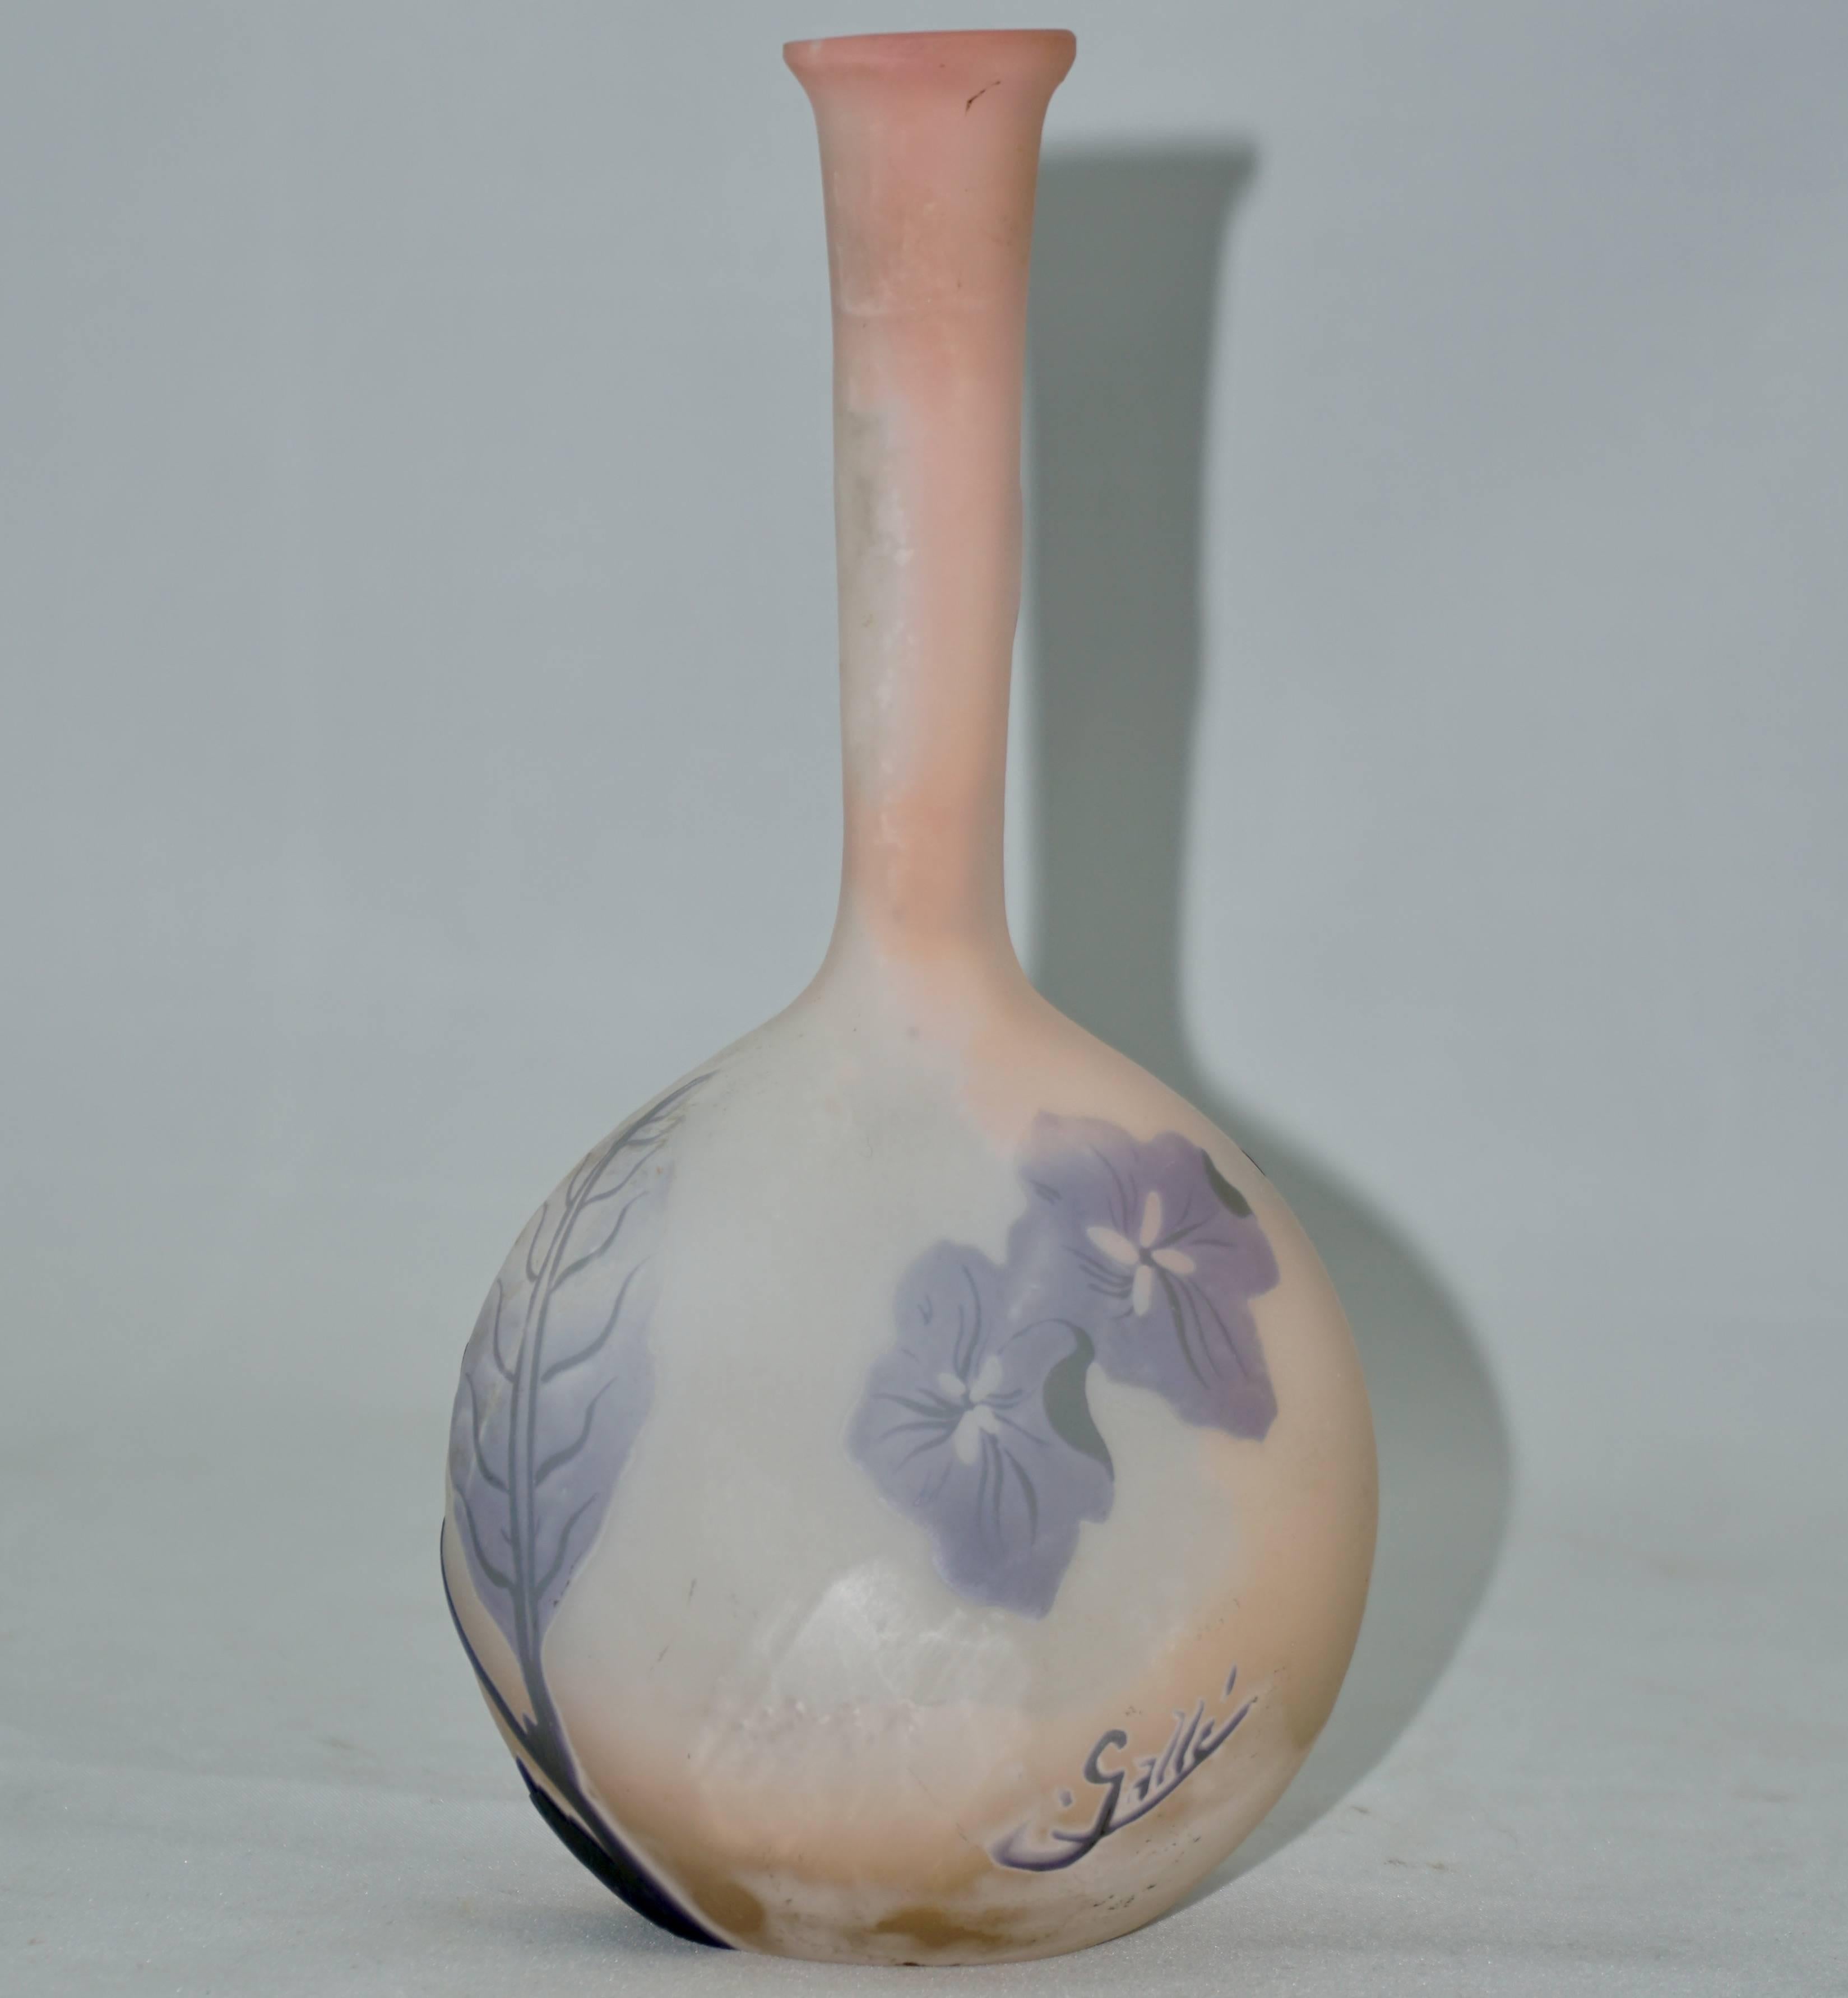 Emile Galle French Art Nouveau floral Banjo vase, circa 1904.
This soliflor opaque glass wheel carved and acid etched cameo vase has back ground colors of pink and cream with the foreground beautifully etched with flowers in lavender and